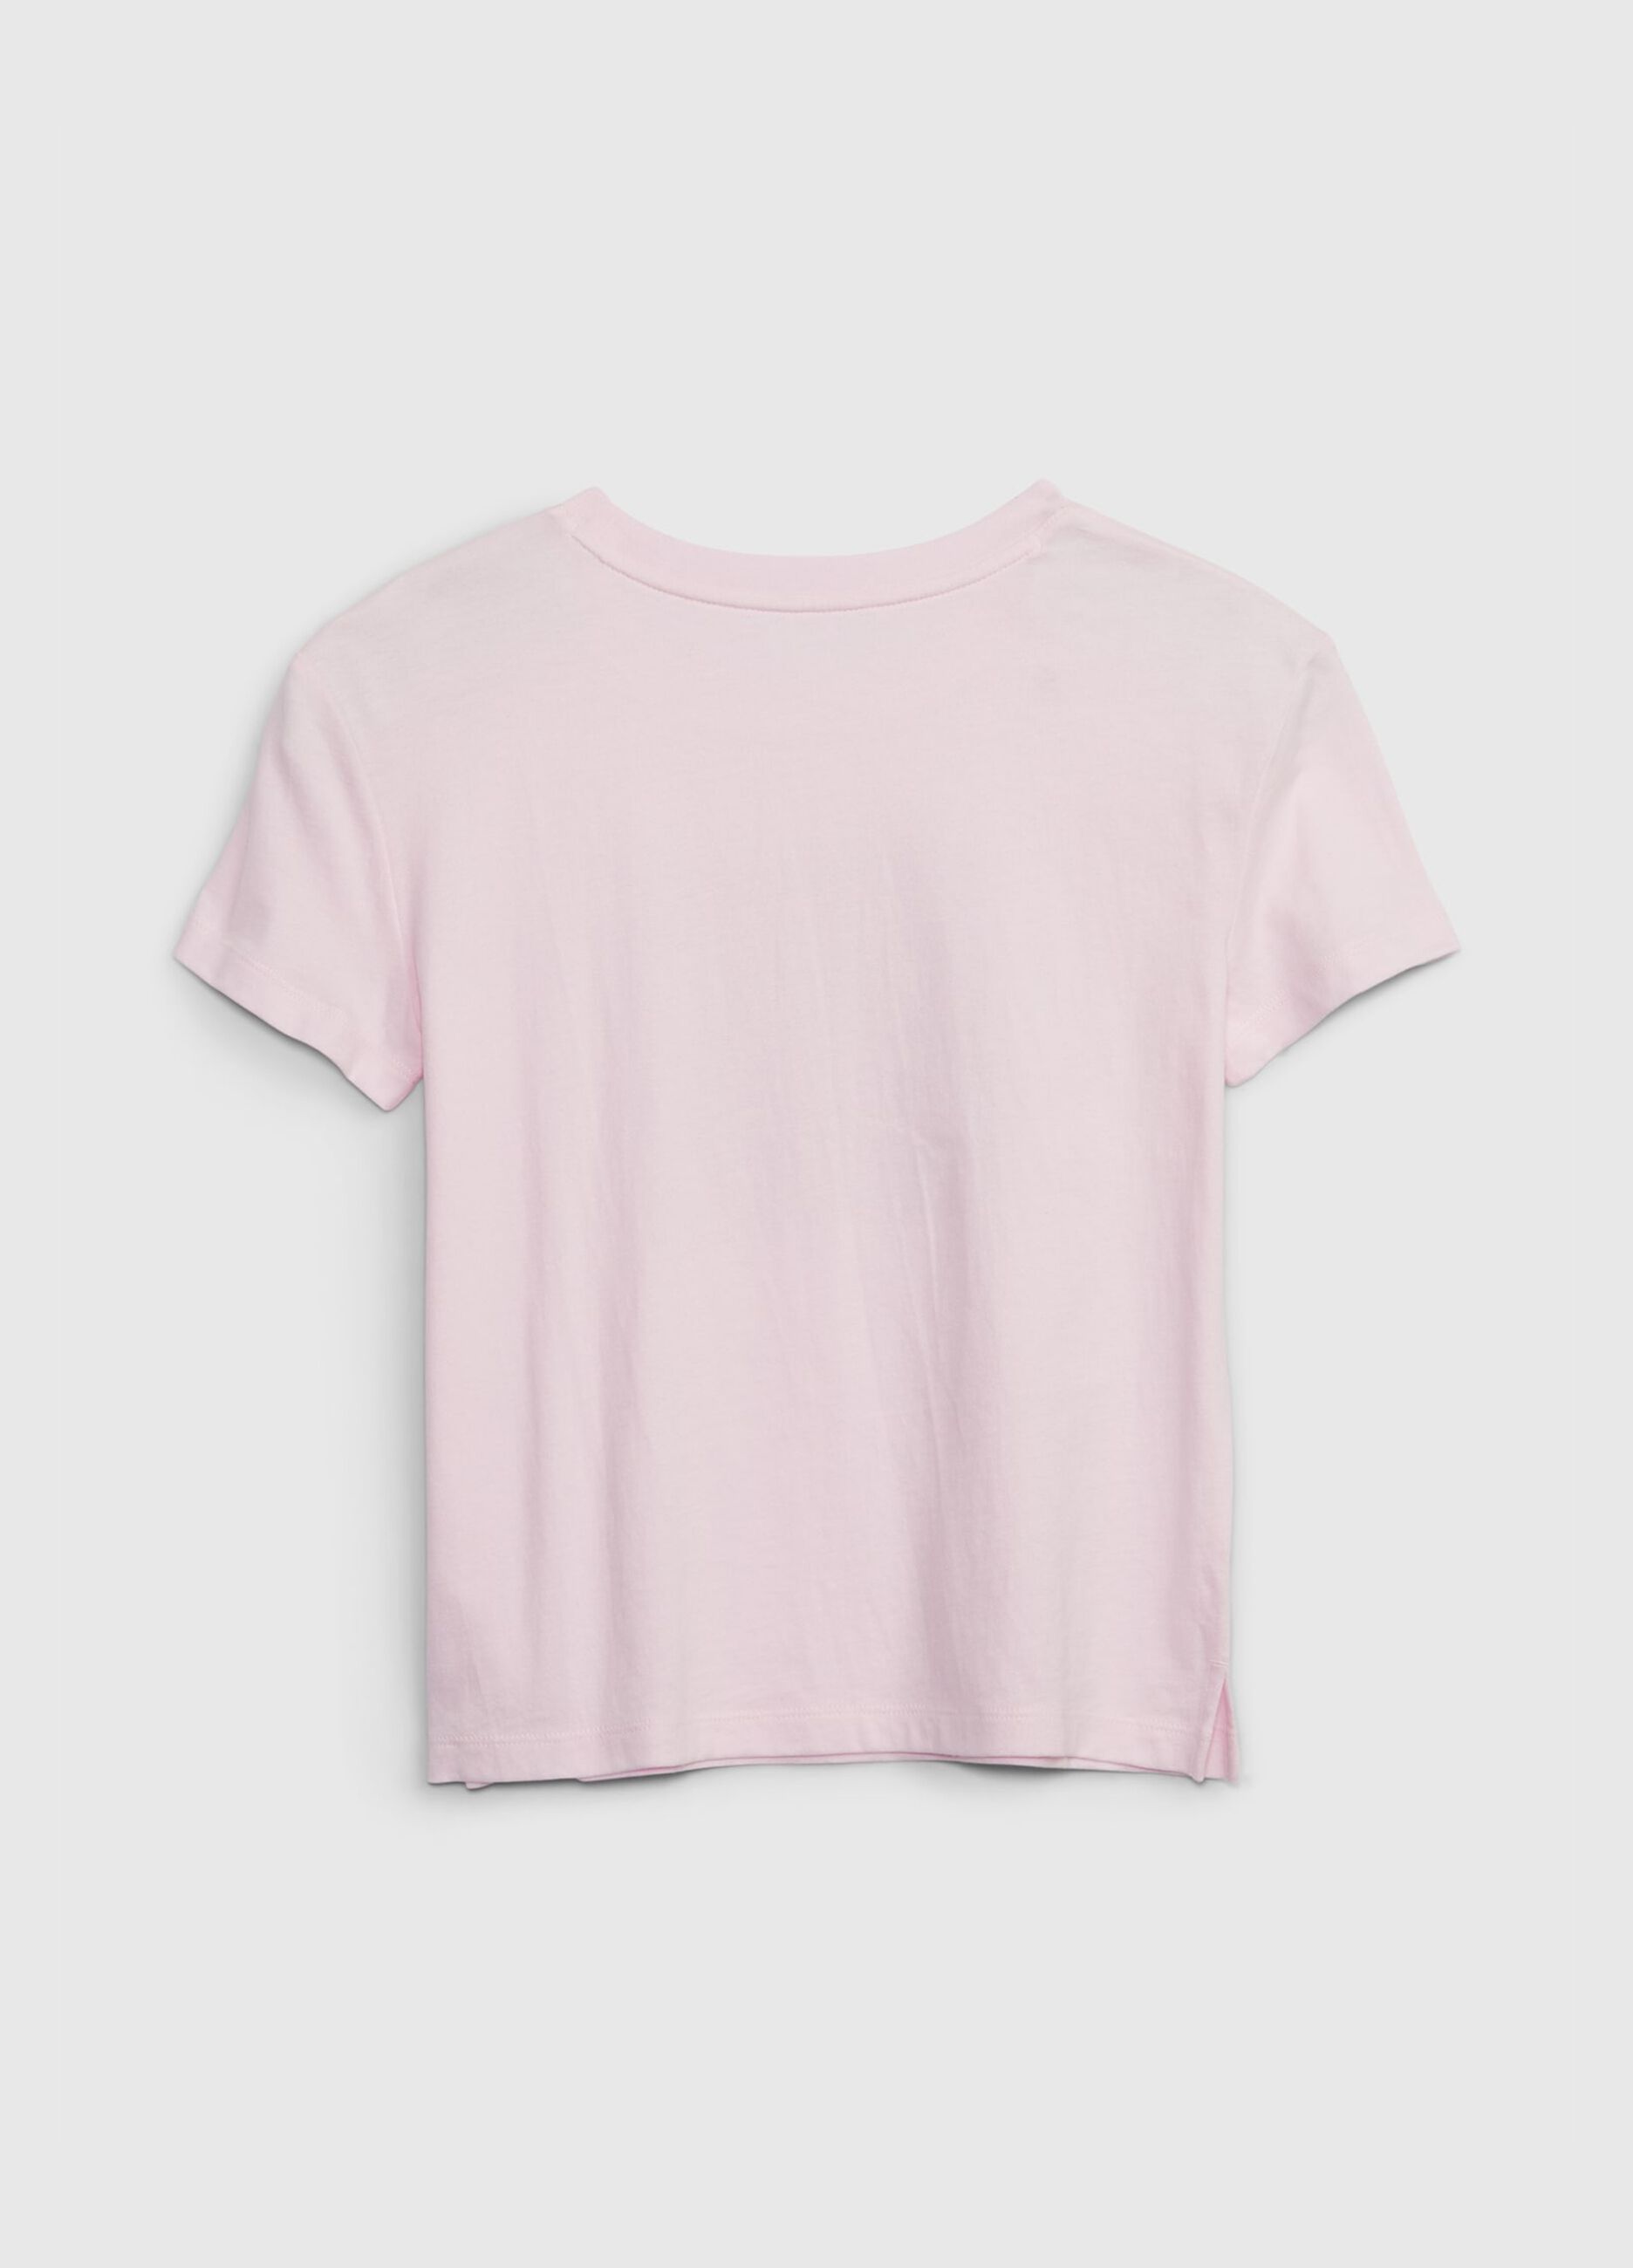 Round neck T-shirt with Barbie™ print